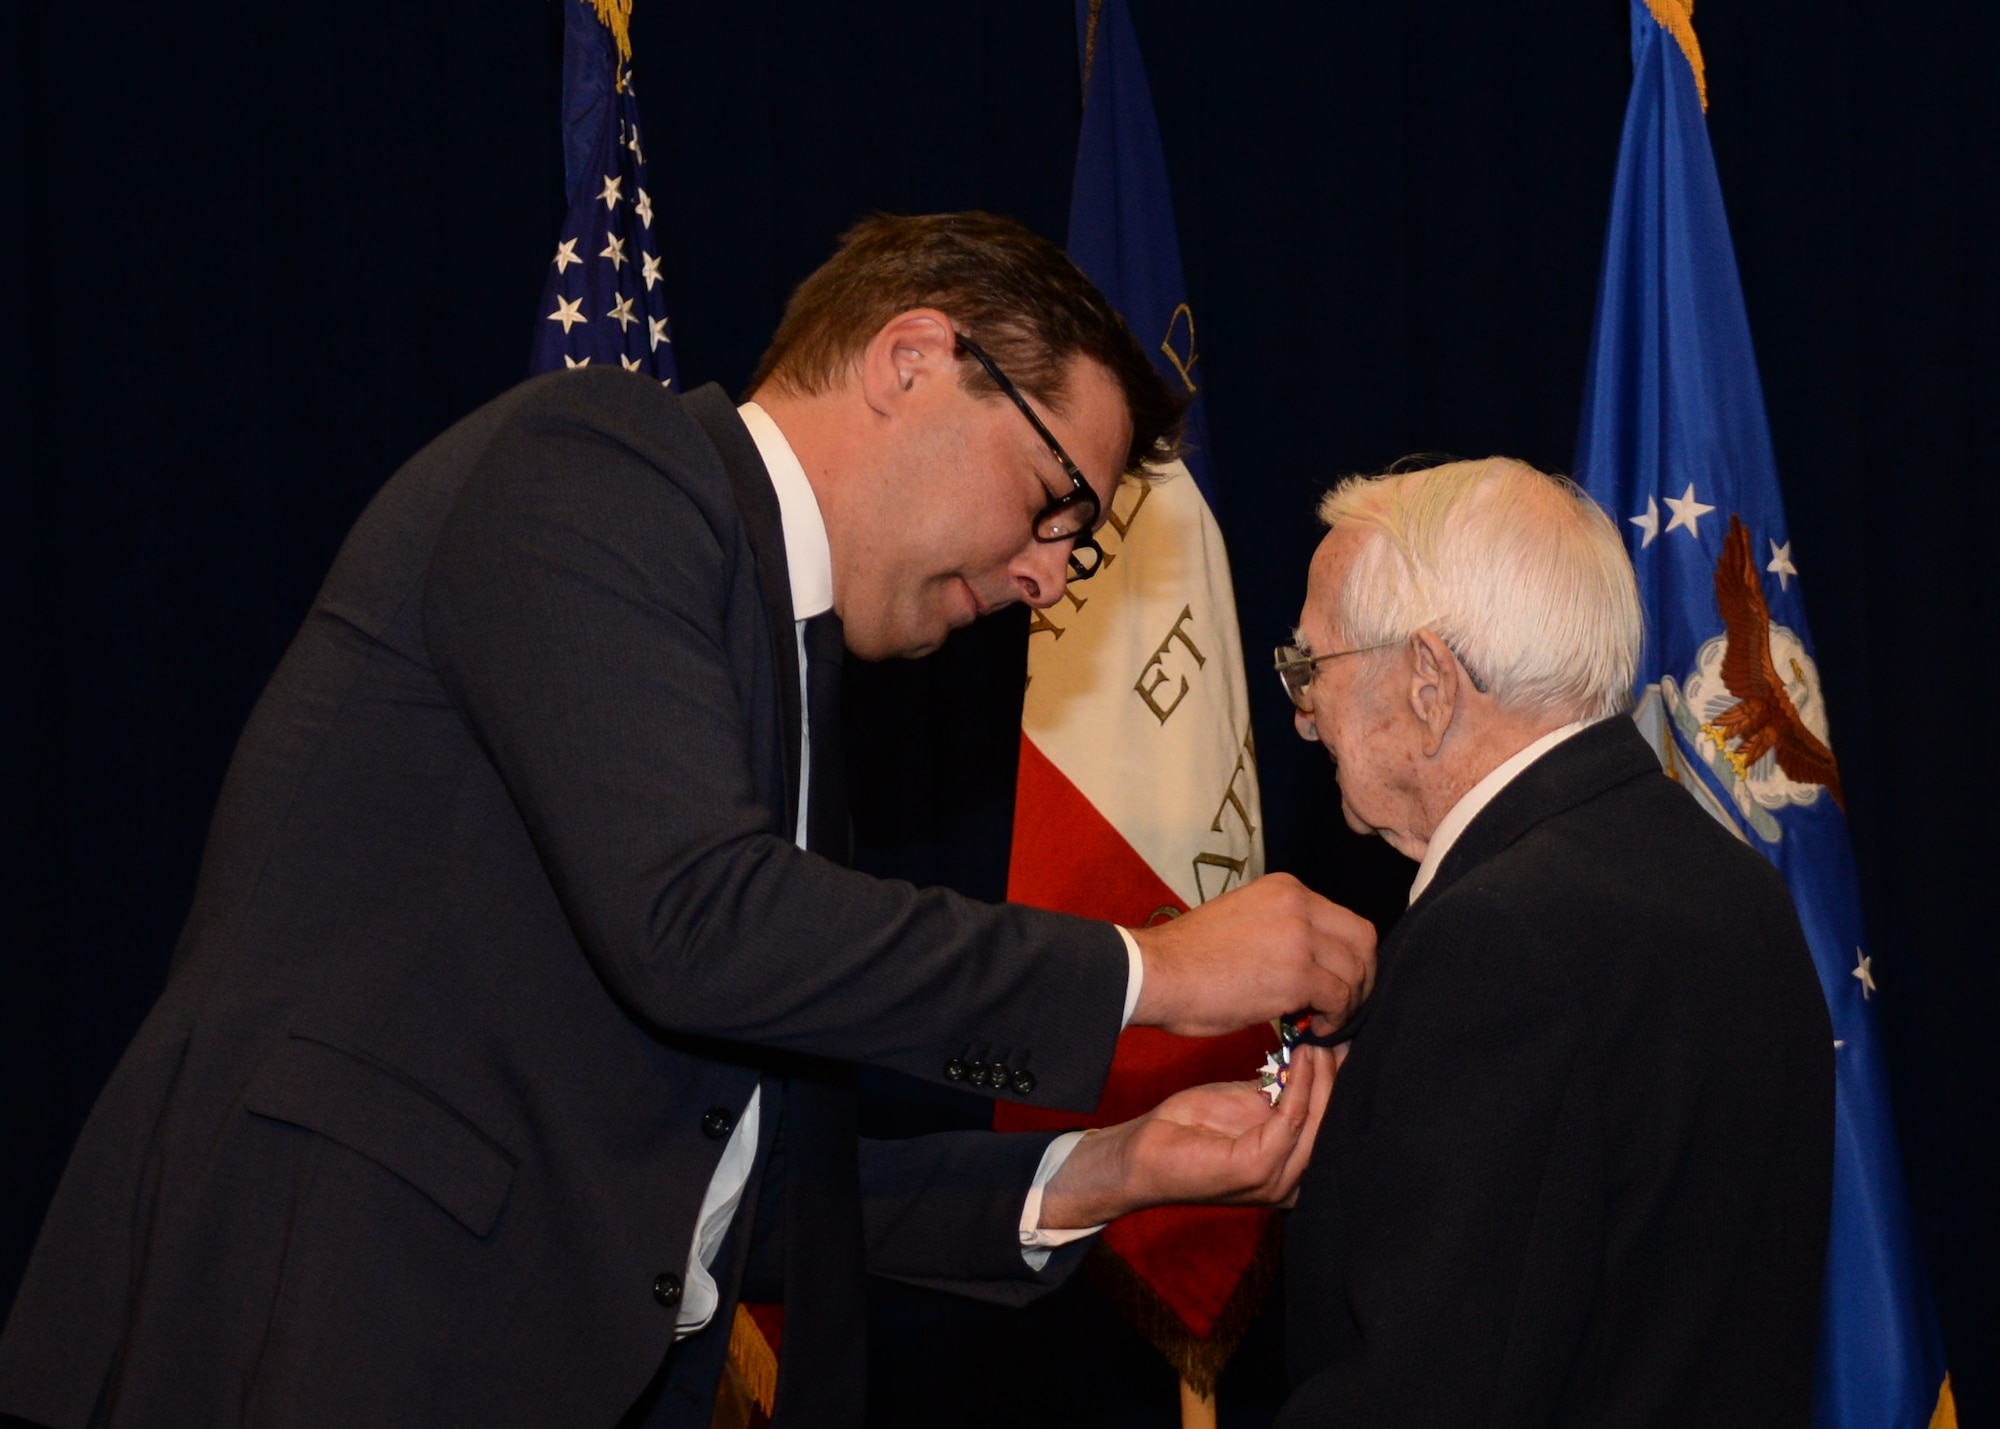 Christophe Lemoine, French consul general in Los Angeles, presents the Legion of Honor medal to retired Air Force Reserve Maj. Russell “Lynn” Clanin. The medal is the French government's highest distinction for military service as a World War II veteran. (U.S. Air Force photo/Van De Ha)